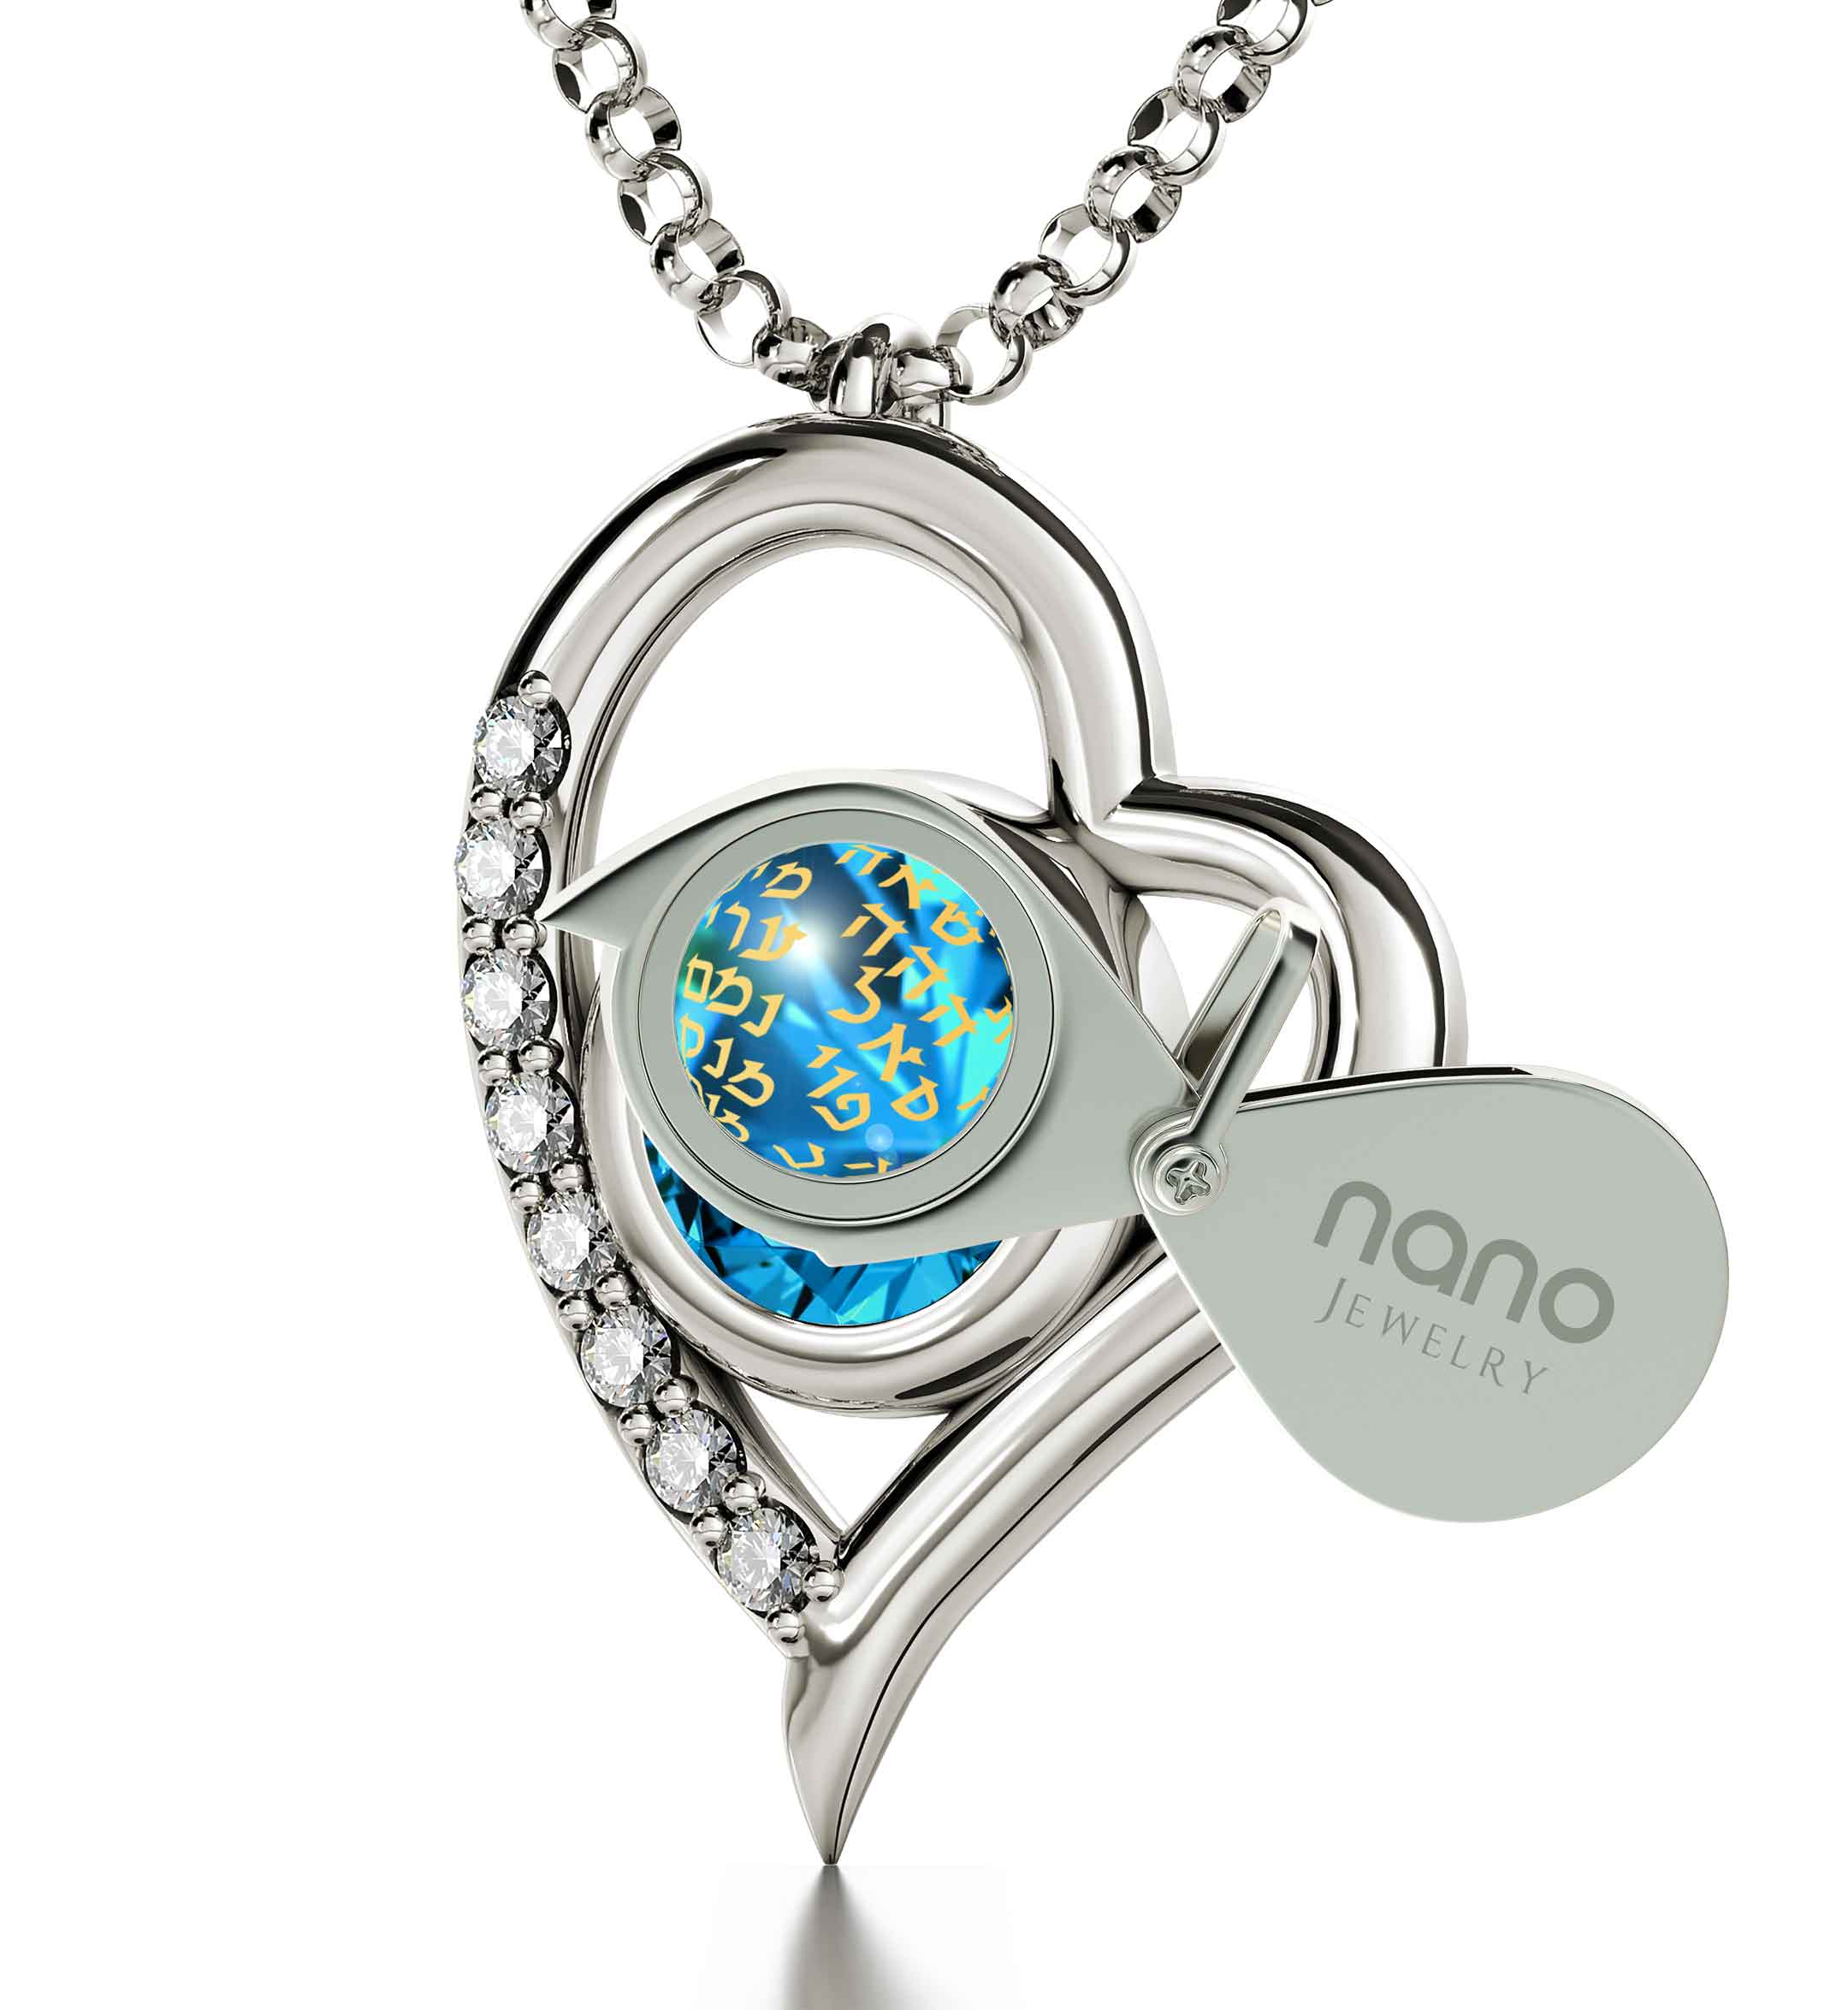 Close-up of a round-cut Swarovski crystal with golden text overlay containing various words, set in a 925 Sterling Silver Kabballah Necklace 72 Names Heart Pendant 24k Gold Inscribed frame.